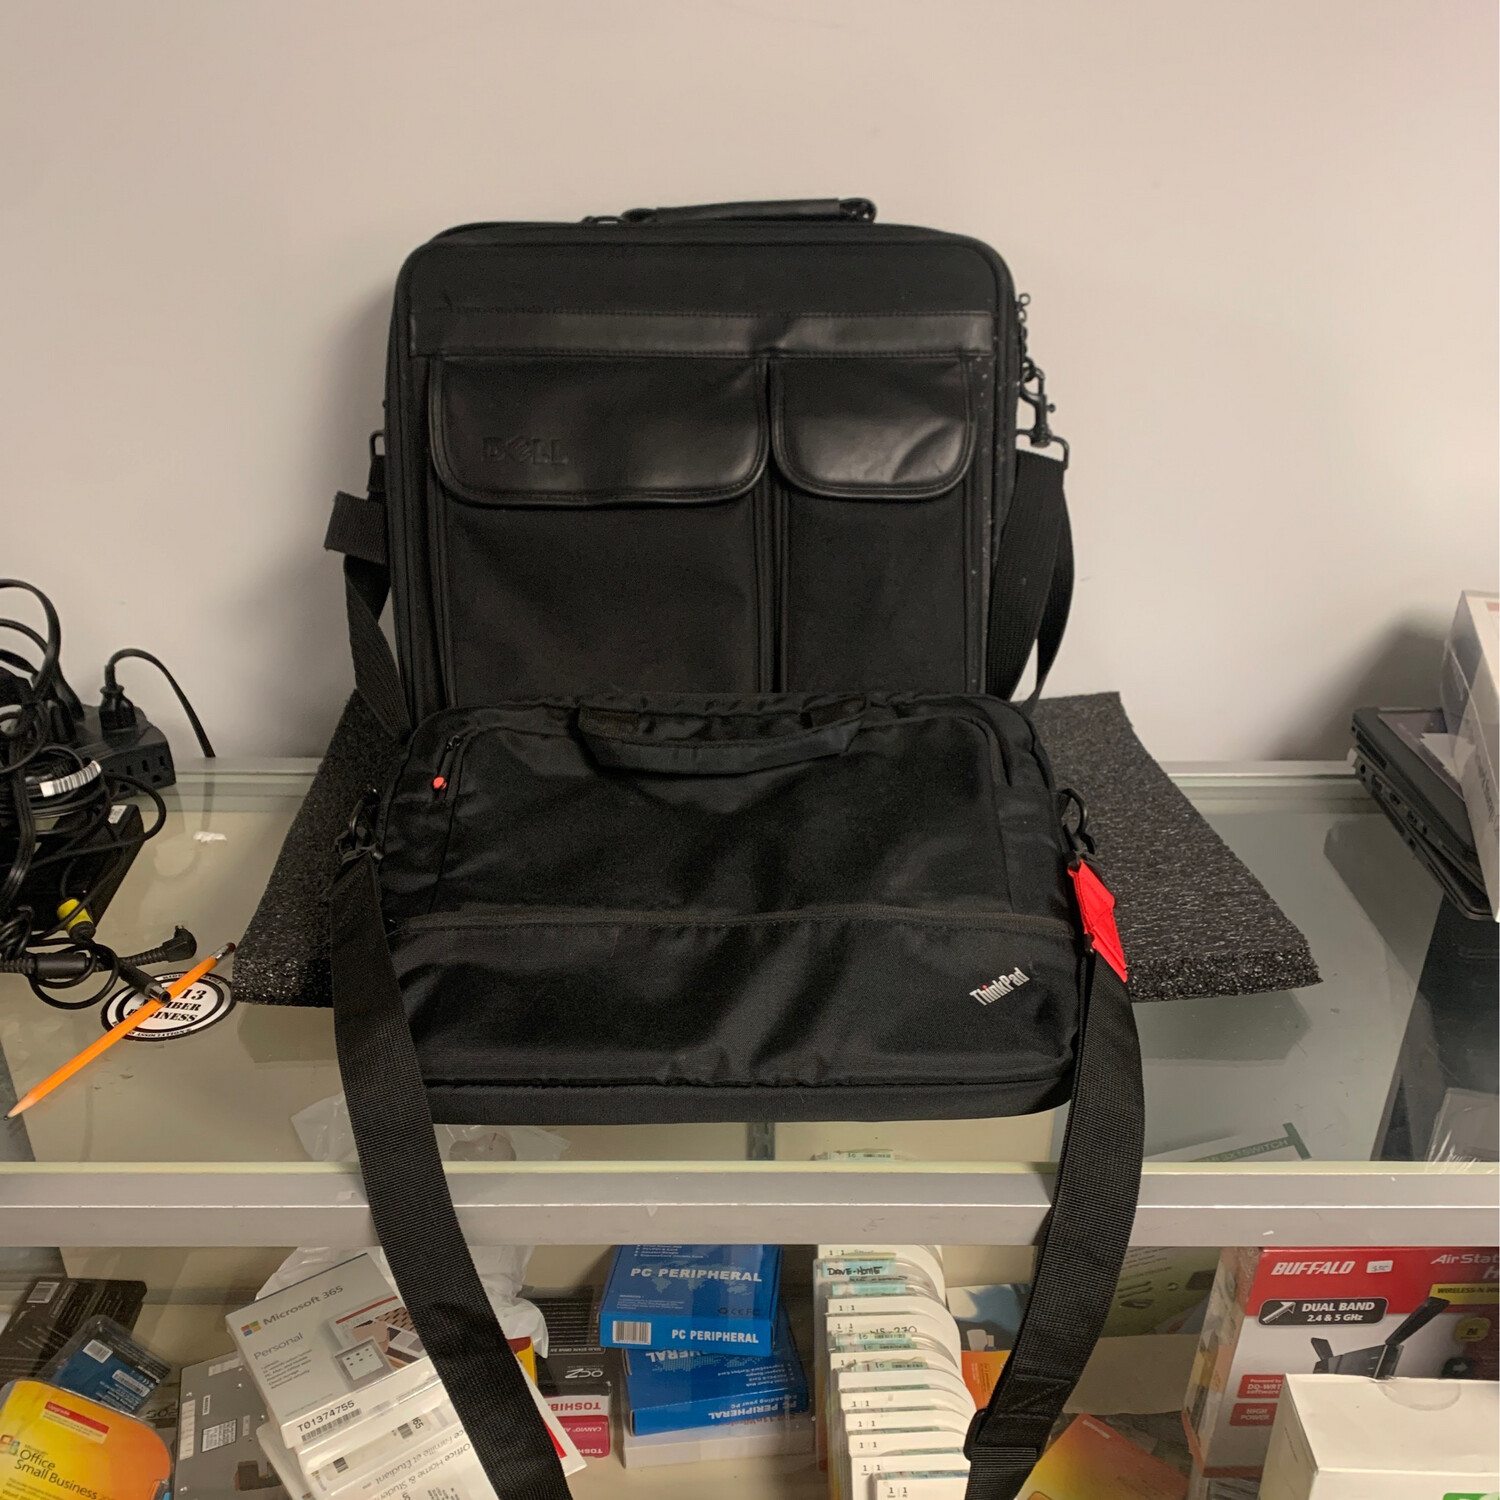 Grade B Laptop Bags - Many Different Size And Brands In Stock